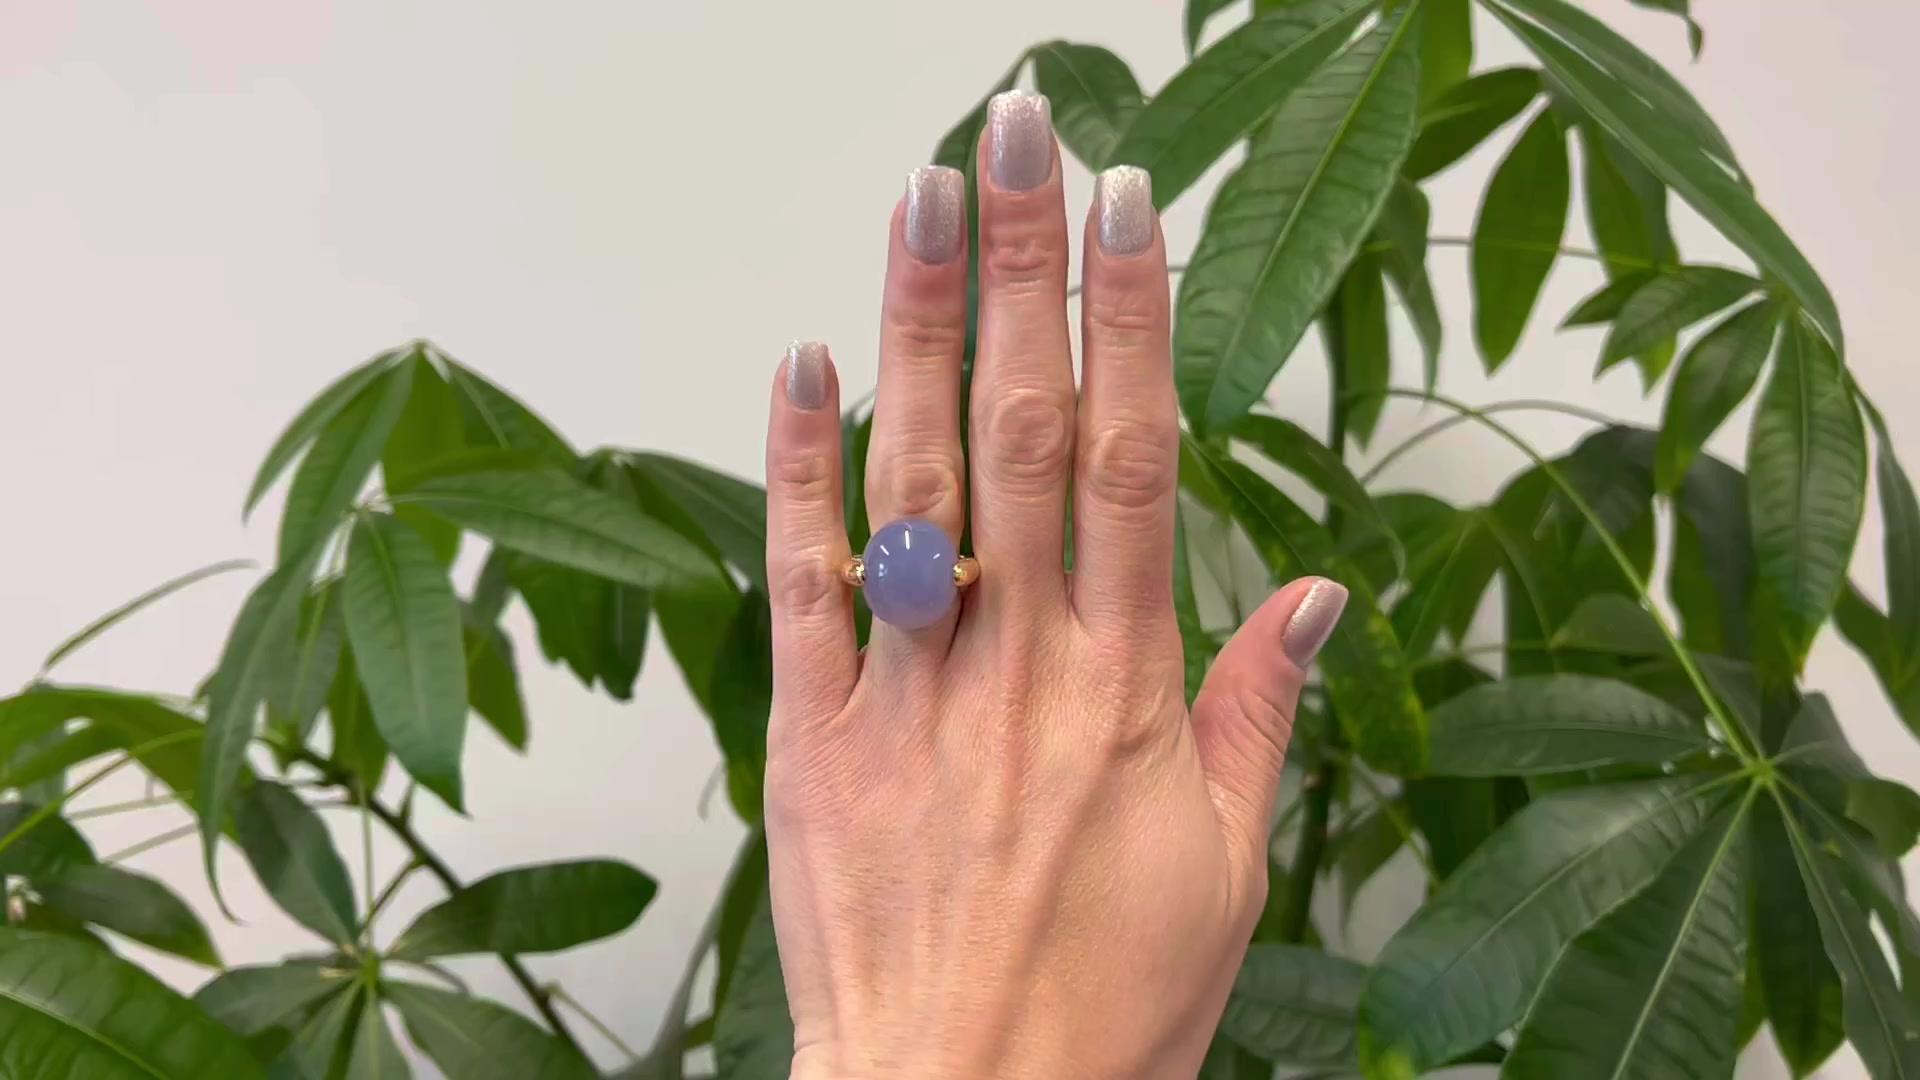 One Pomellato Italian 27.00 Carat Blue Chalcedony 18k Rose Gold Luna Ring. Featuring one cabochon cut blue chalcedony weighing approximately 27.00 carats. Crafted in 18 karat rose gold signed Pomellato with Italian hallmarks and purity marks. Circa